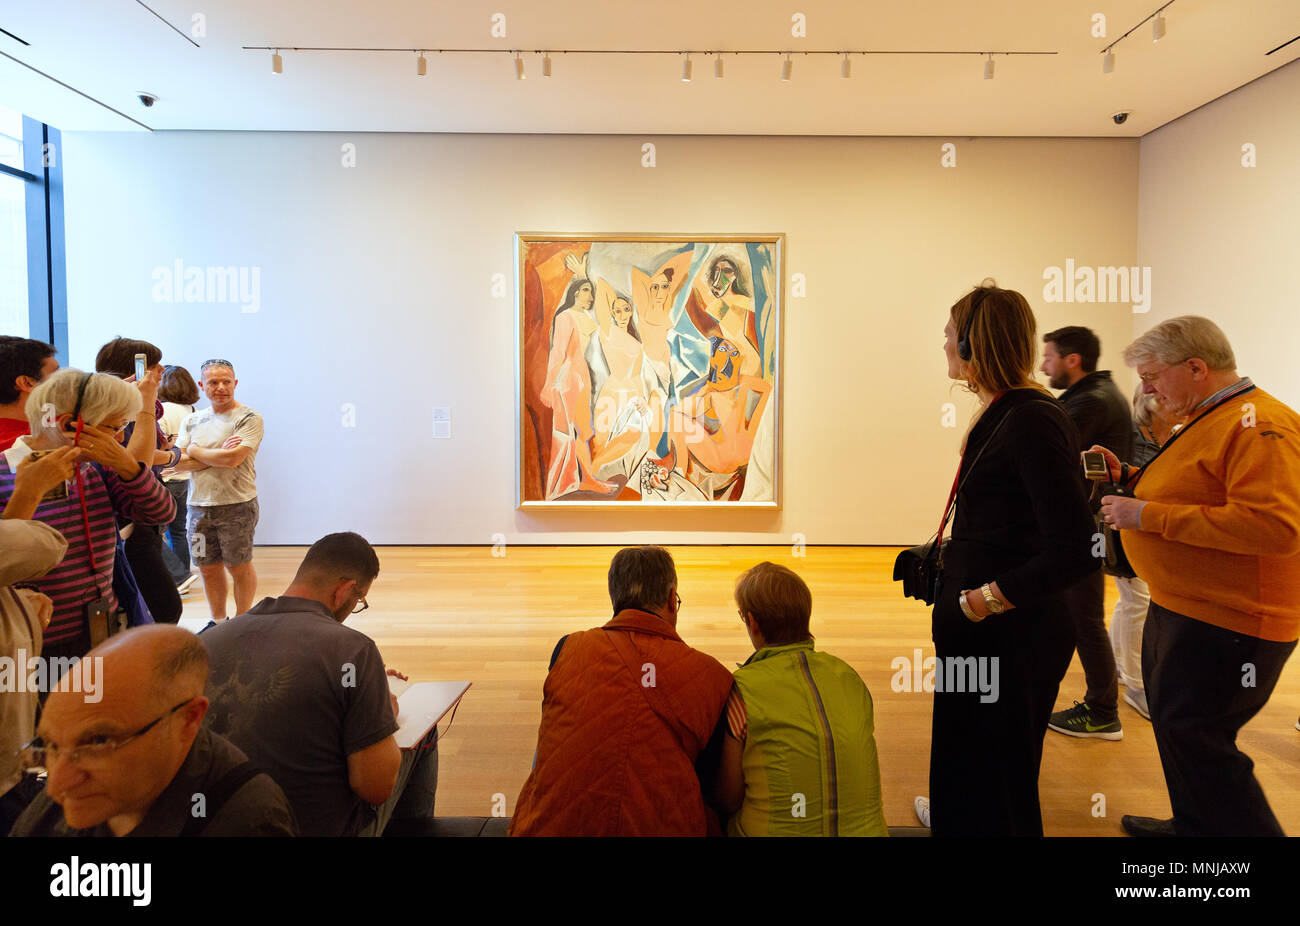 Visitors to MoMA, Museum of Modern Art, New York looking at Les Demoiselles d'Avignon oil painting by Pablo Picasso Stock Photo